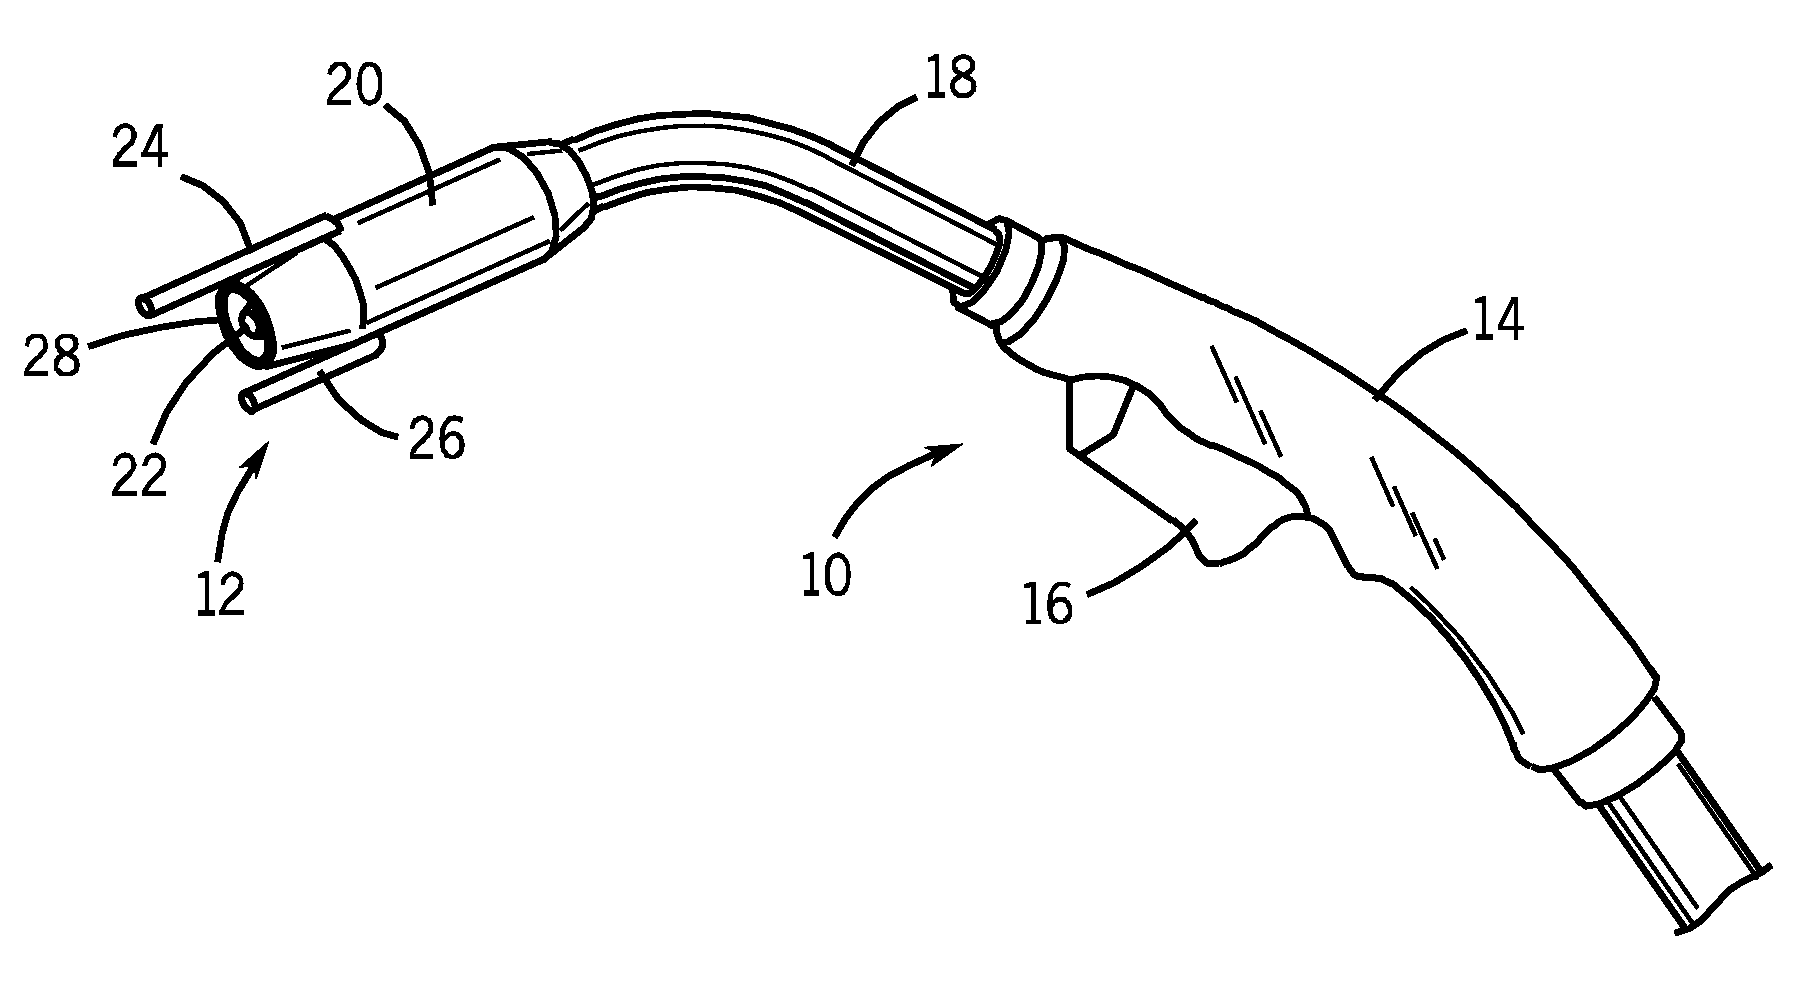 Positioning attachment for a welding torch